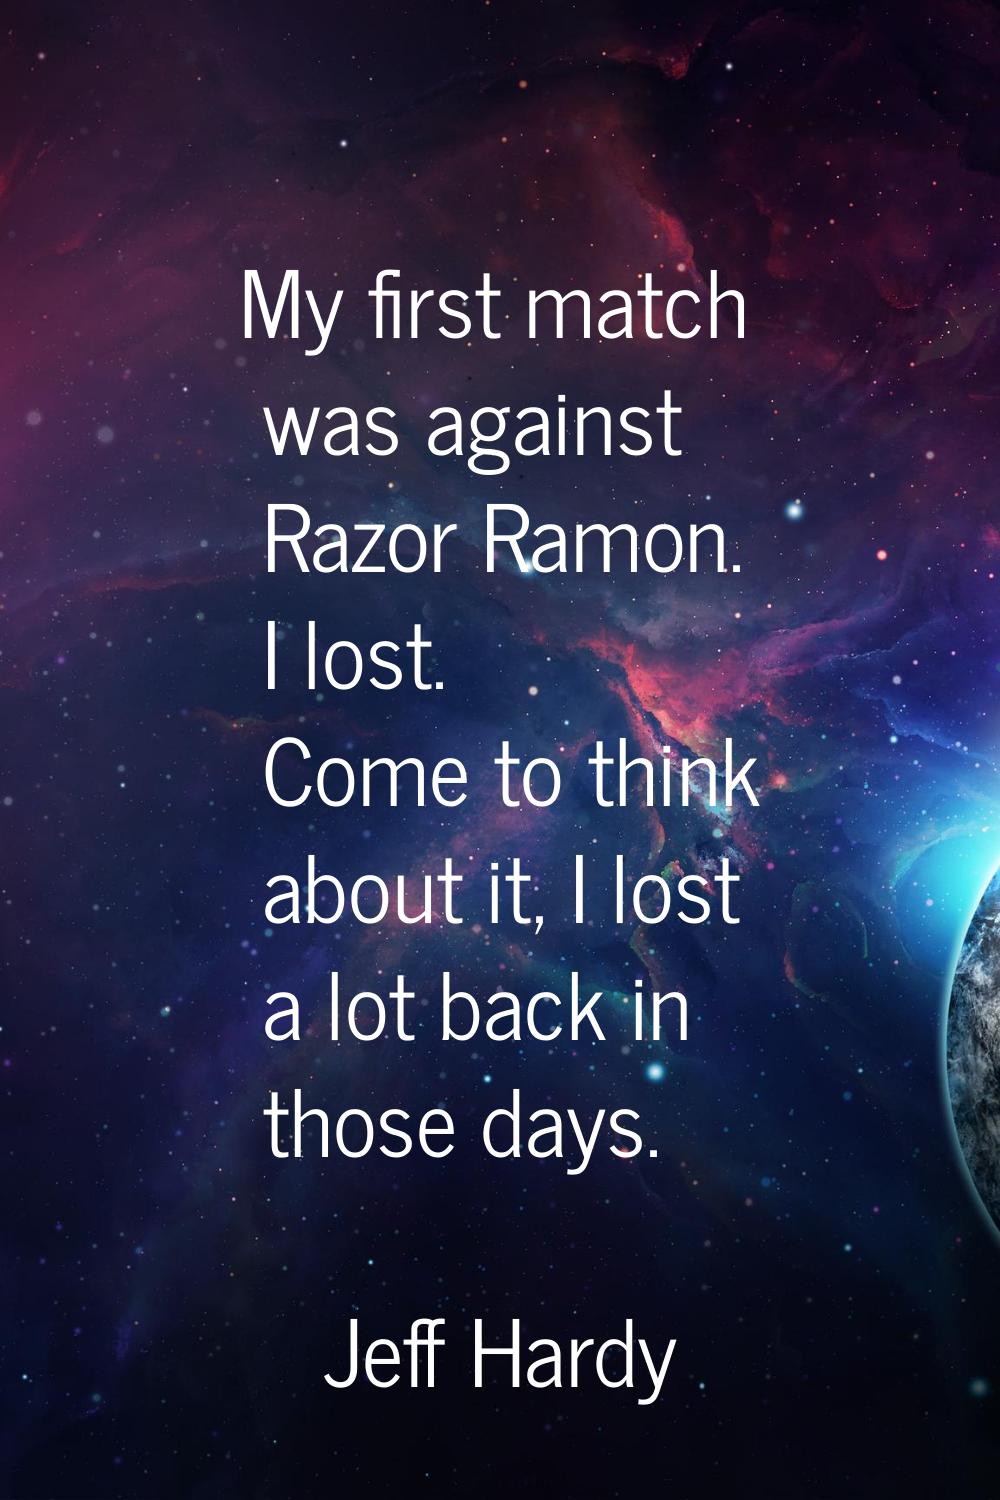 My first match was against Razor Ramon. I lost. Come to think about it, I lost a lot back in those 